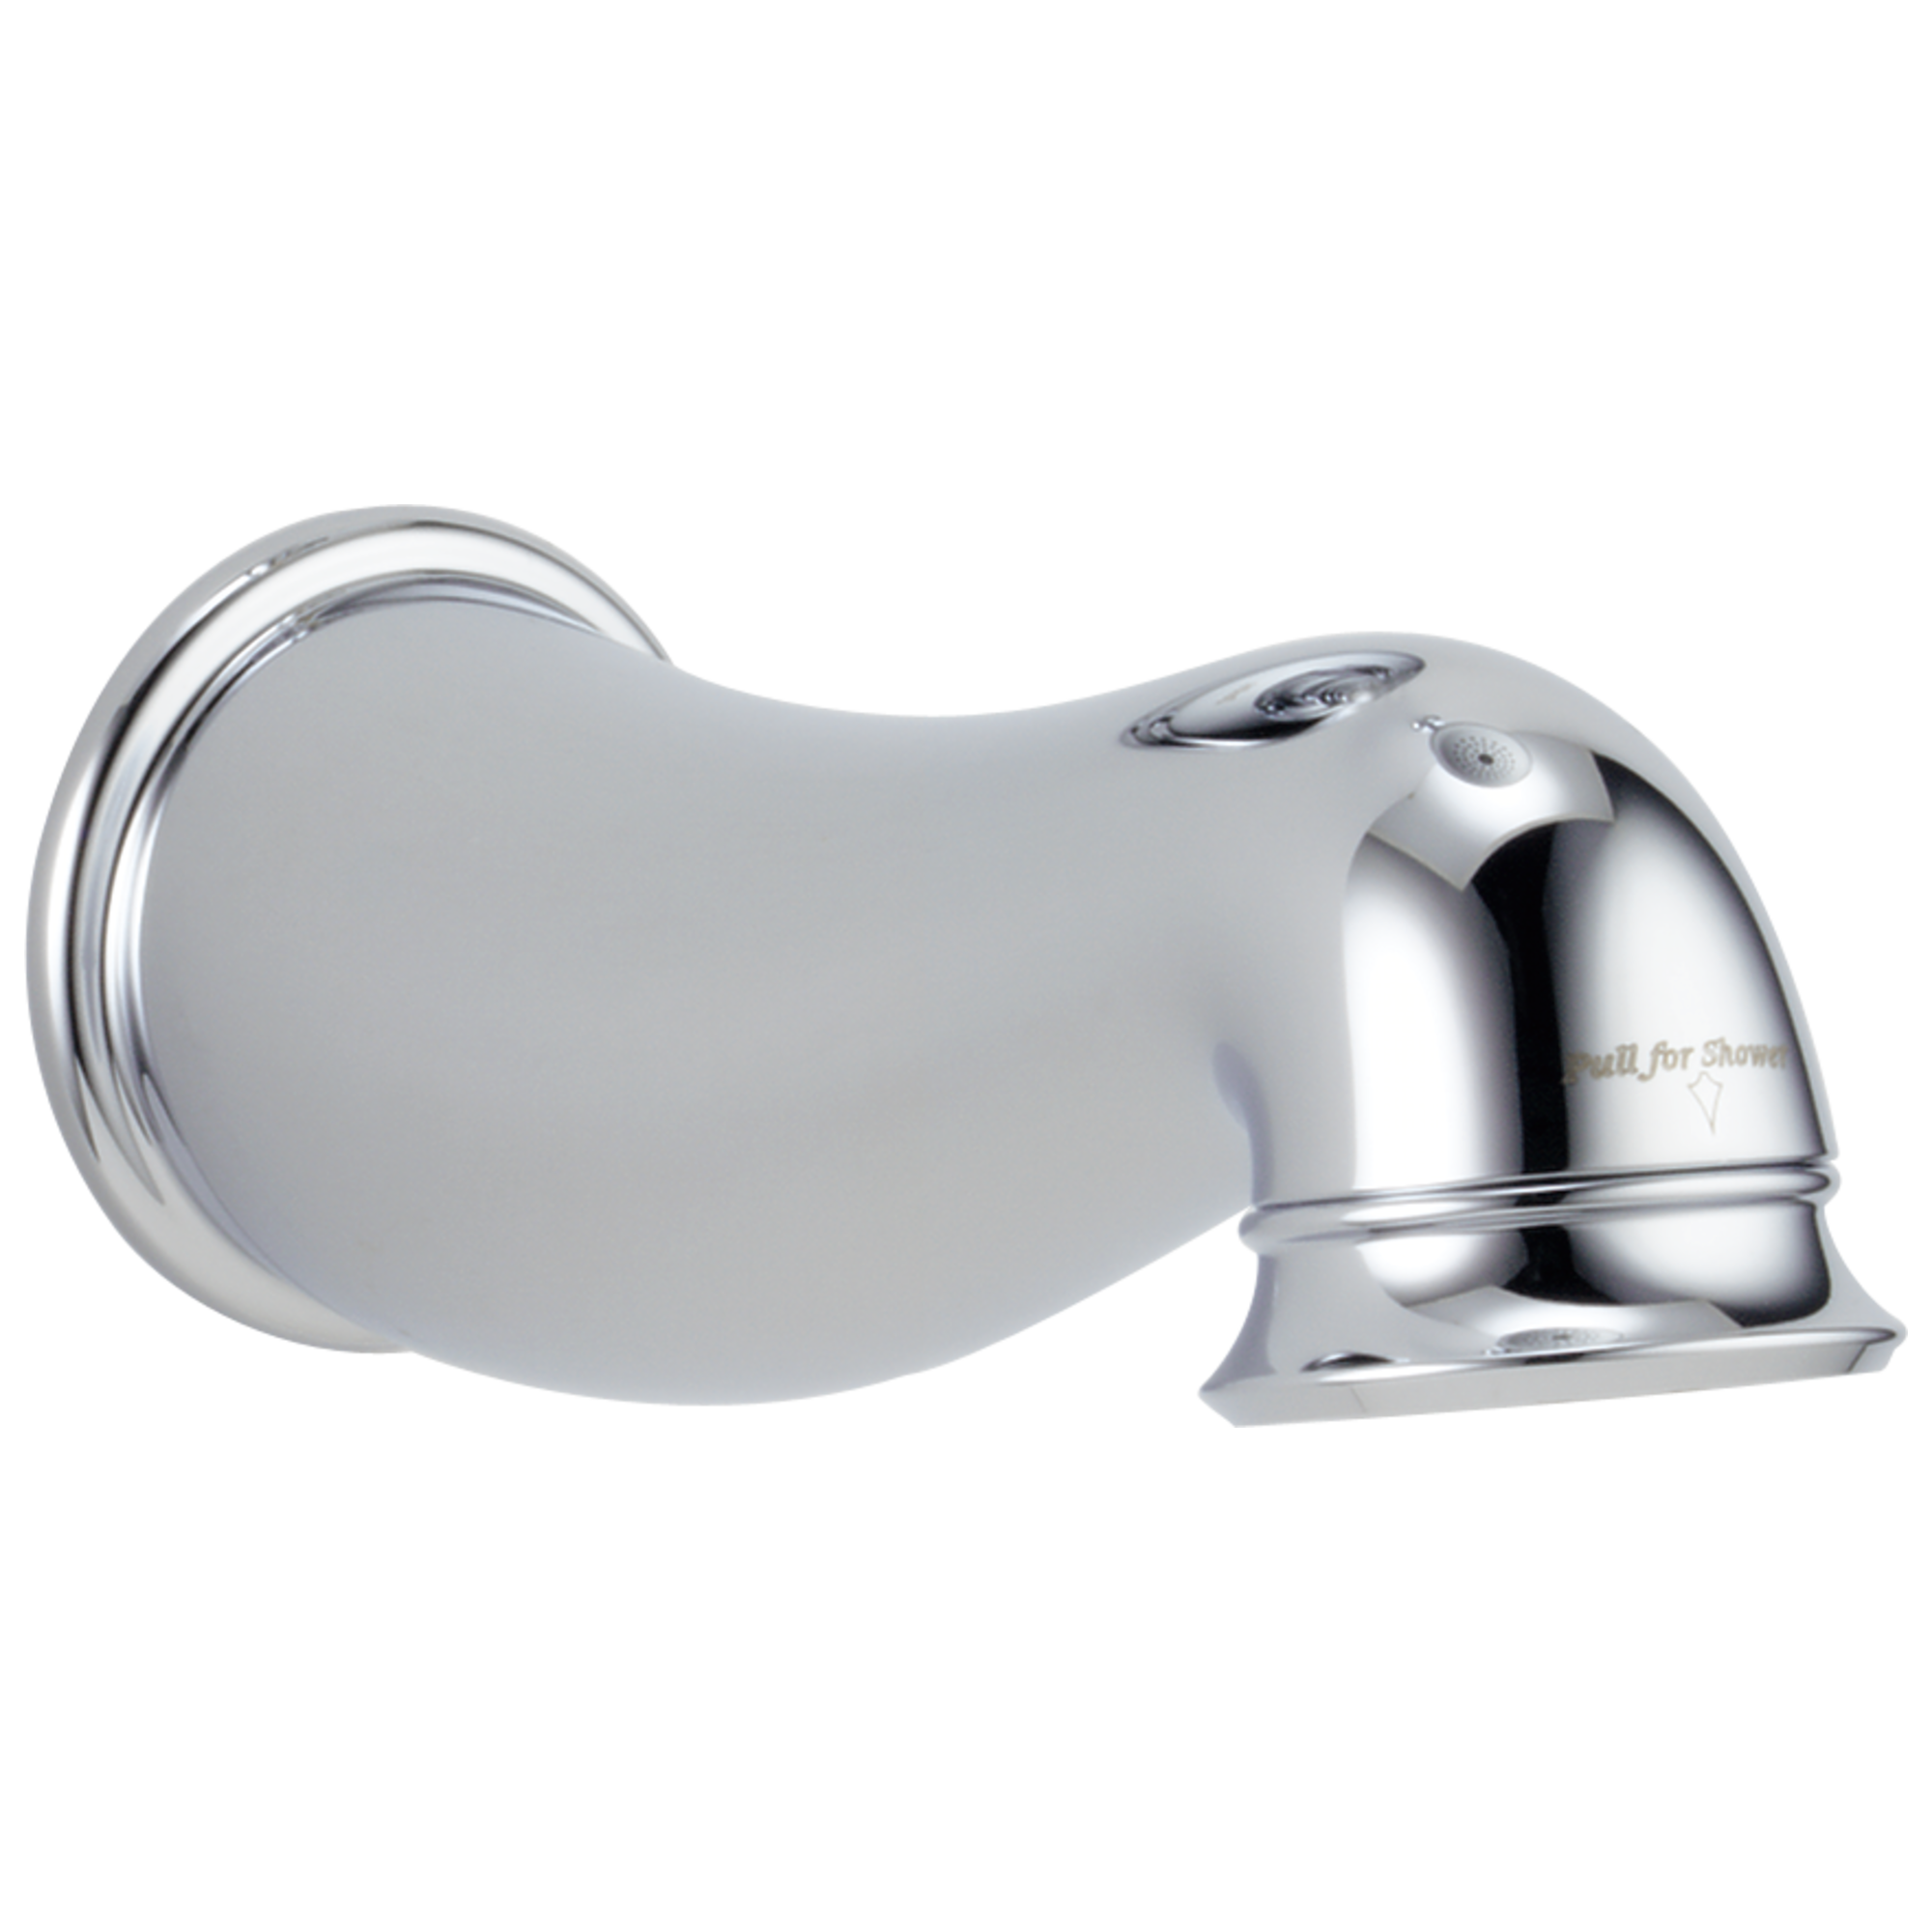 Delta Faucet RP42576 Lockwood Tub Spout with Pull-Down Diverter Chrome 